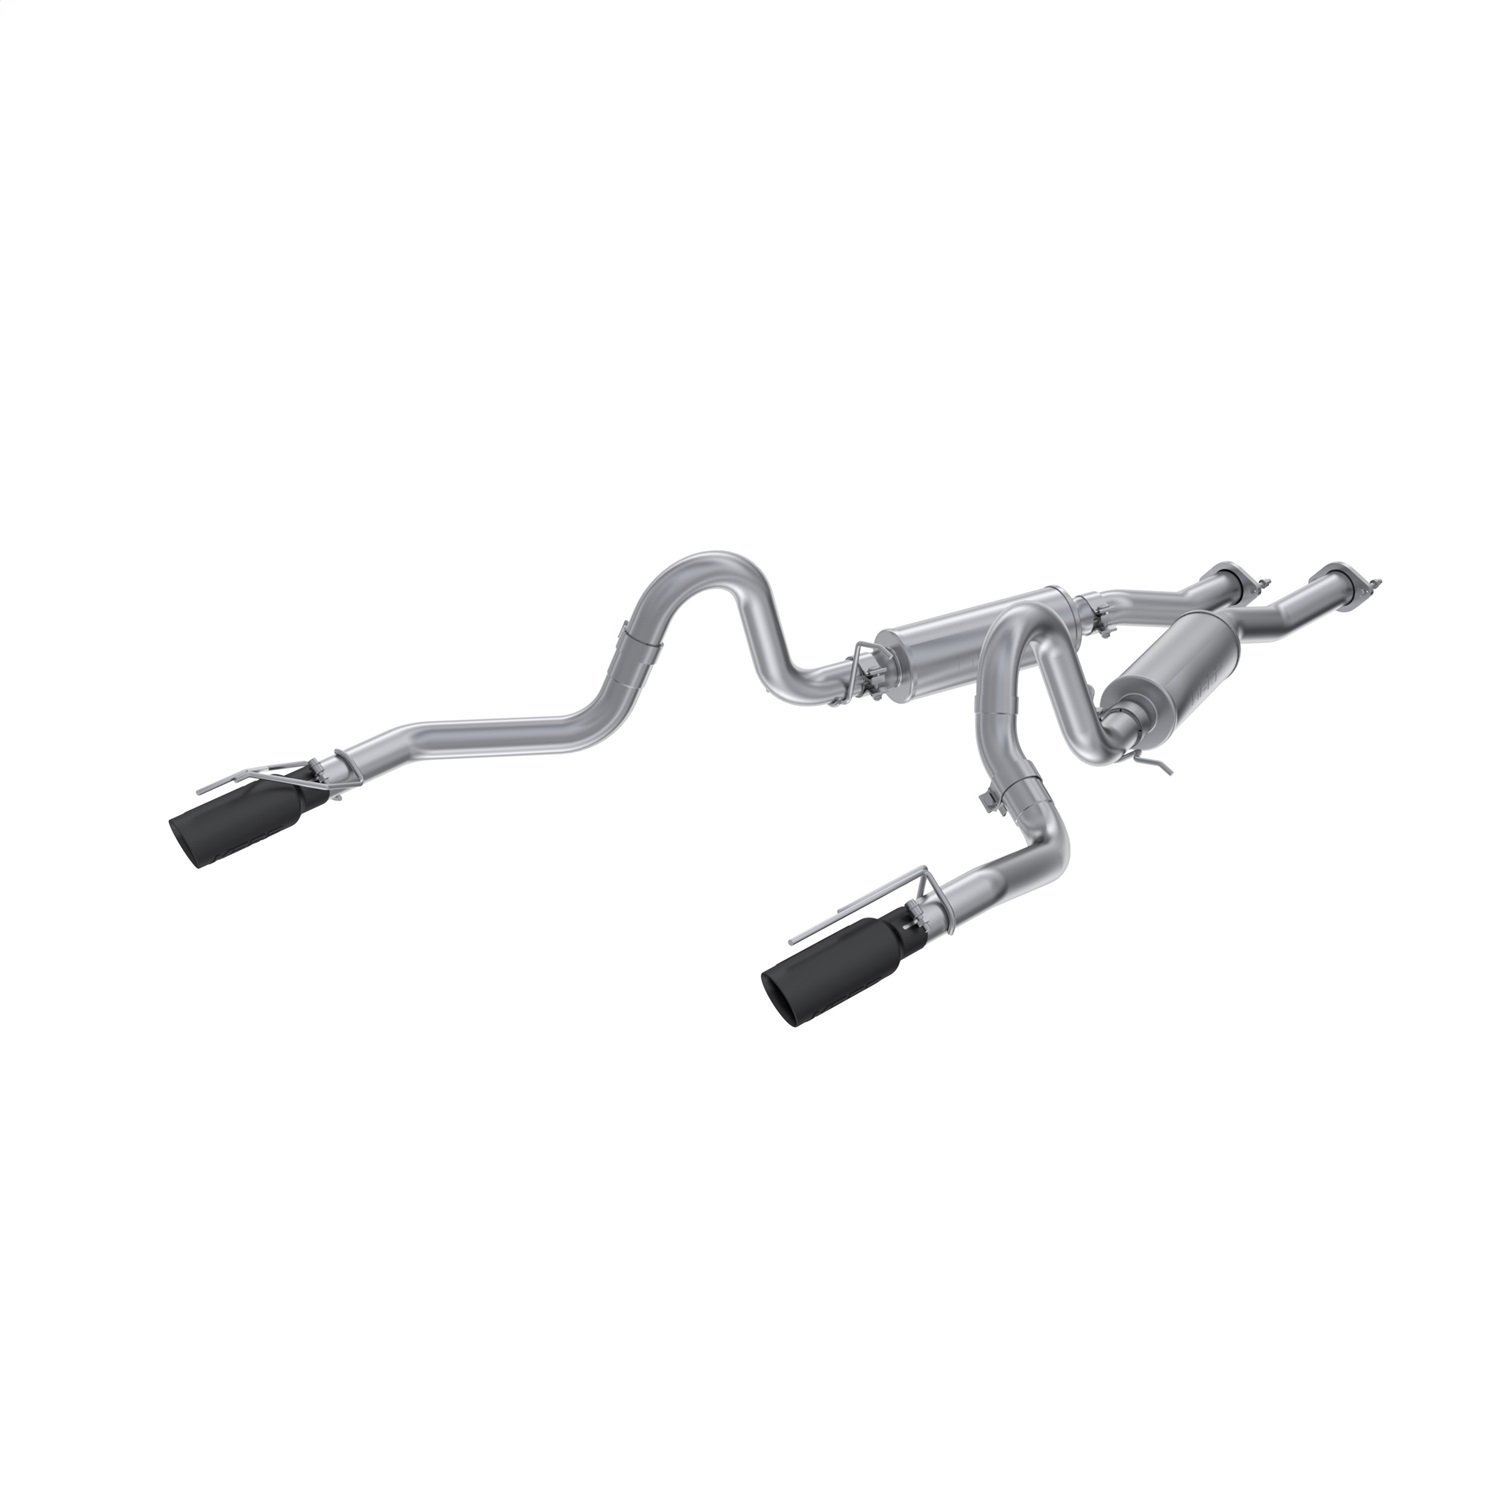 MBRP Exhaust S7221ALBT Armor Lite Cat Back Exhaust System Fits 99-04 Mustang